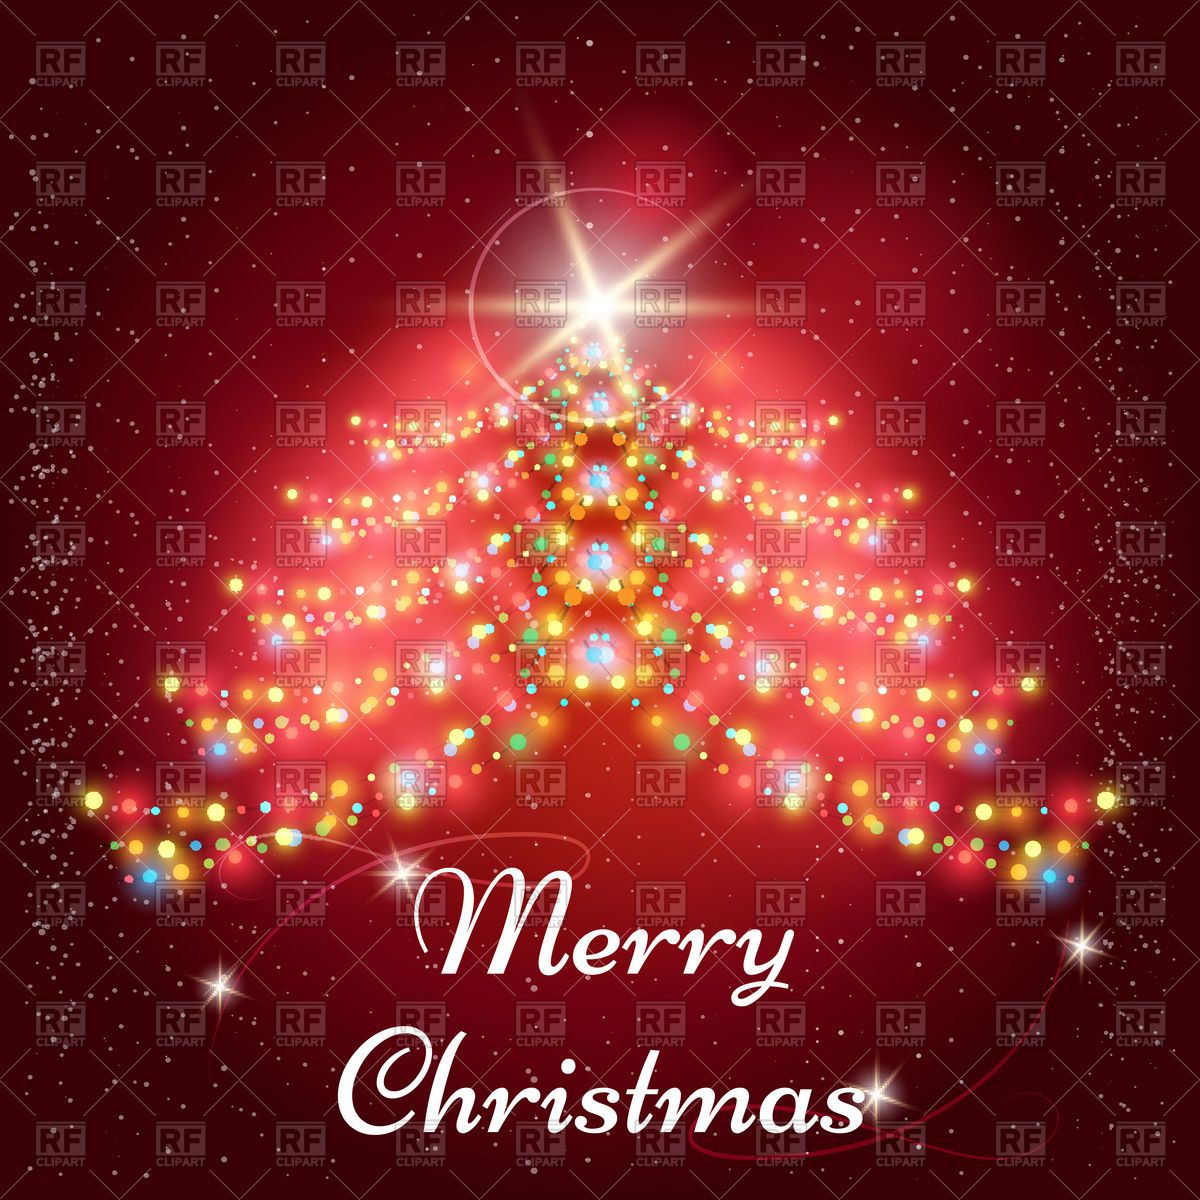 Merry Christmas background with x mas tree and garlands on red